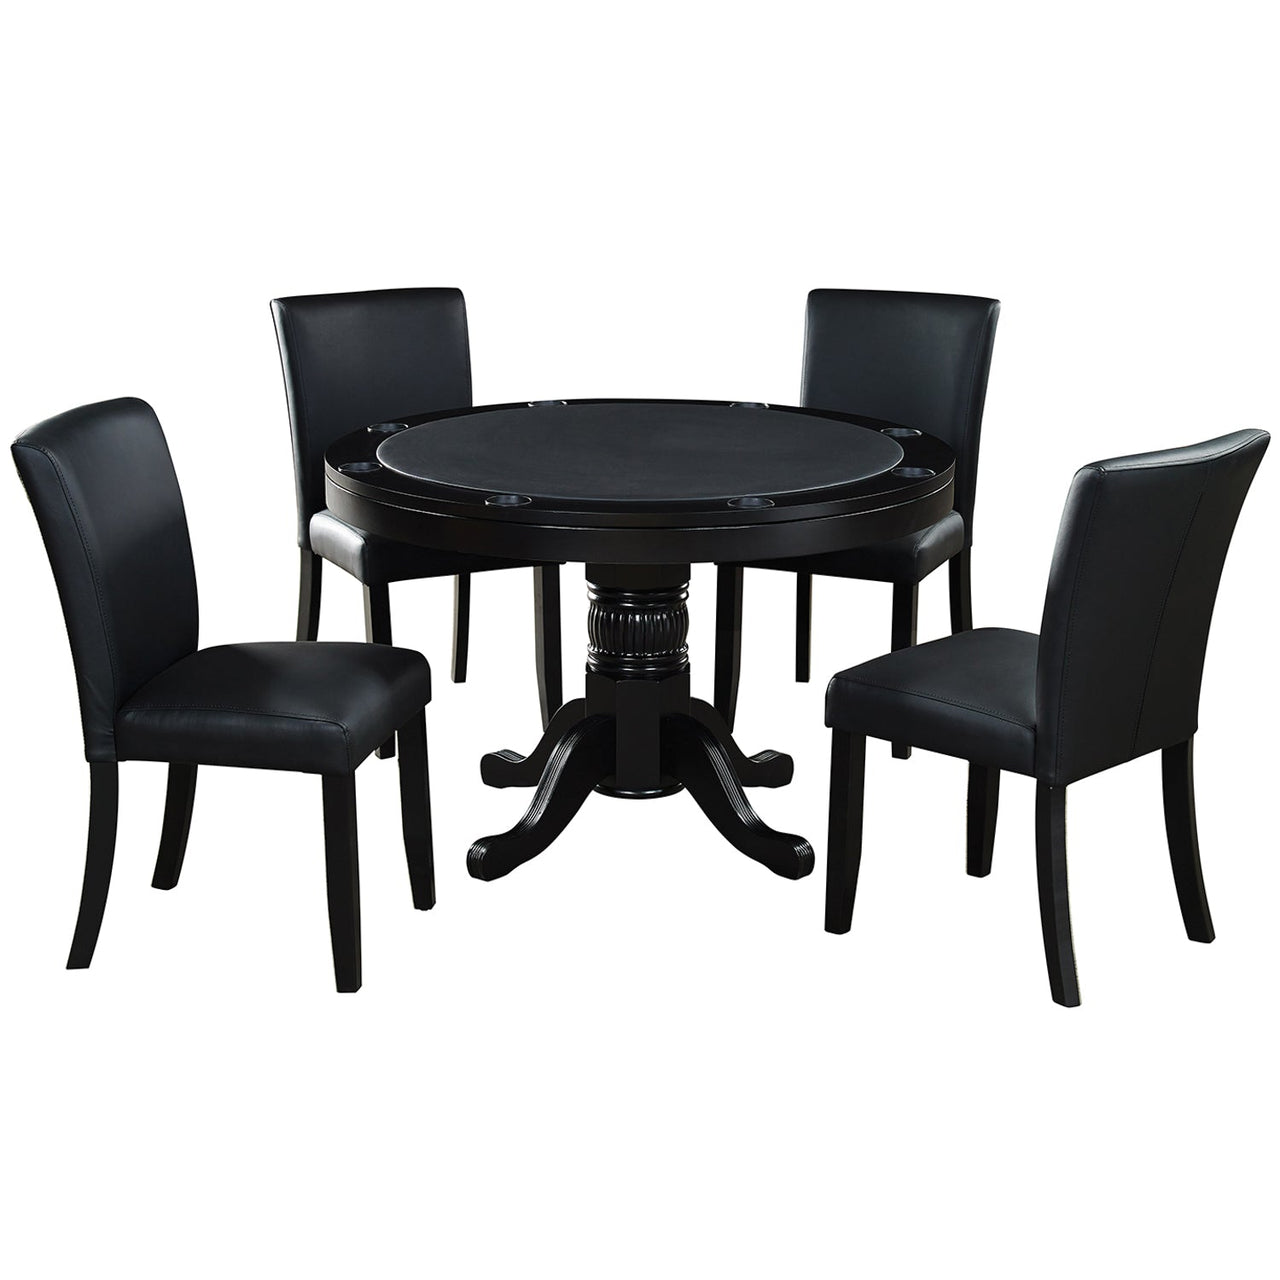 Round Poker Dining Table with Storage, 8-person, 48'', Black, Cappuccino, Chestnut, English Tudor, Antique White, or Slate Finish, by RAM Game Room